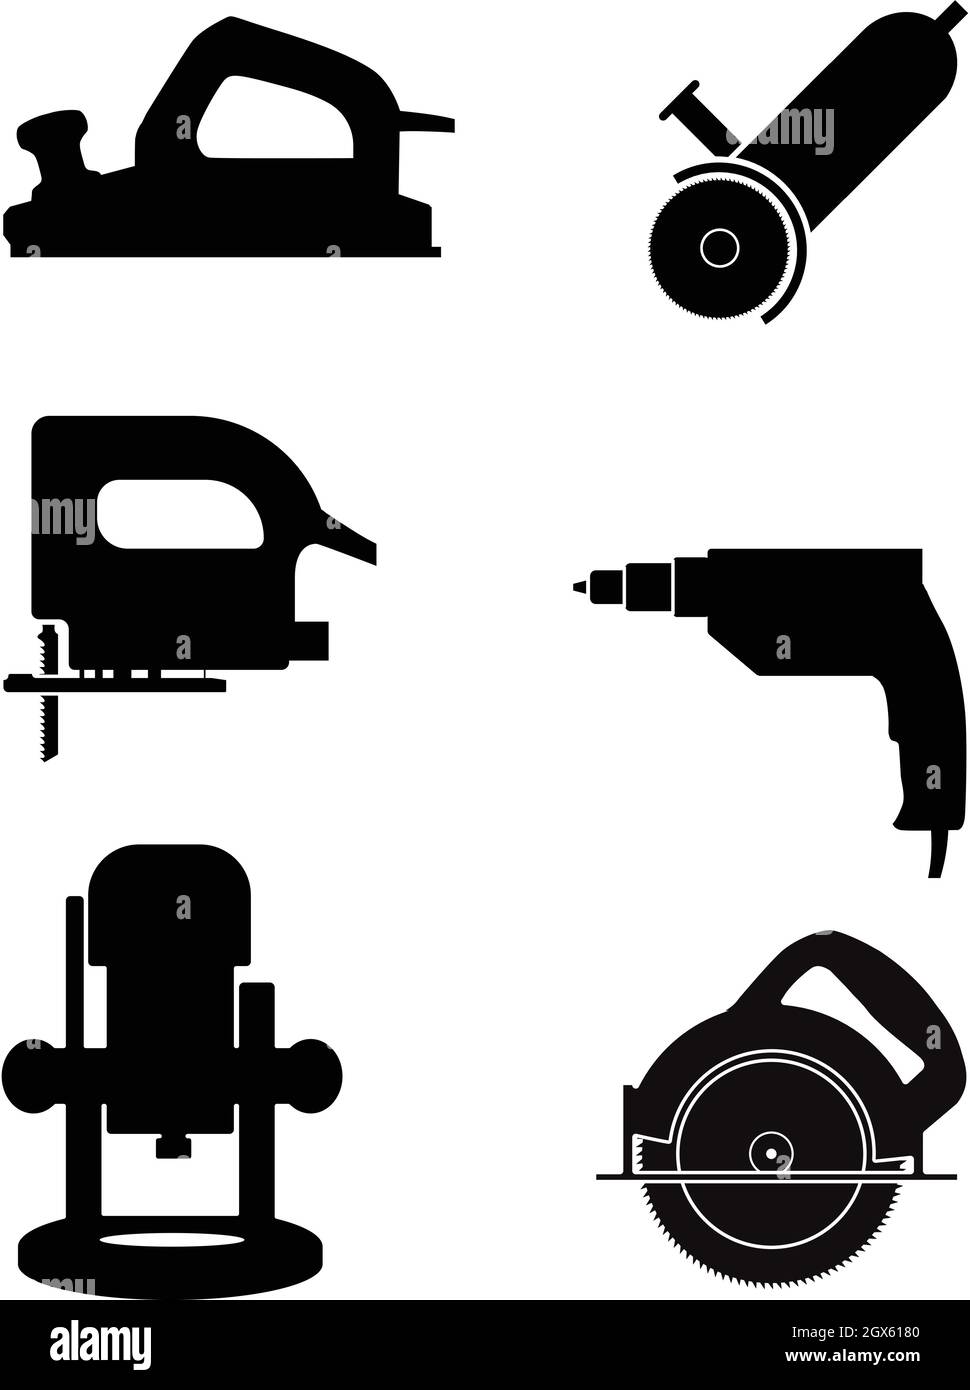 Electric repair tools set vector silhouette illustration isolated Stock Vector